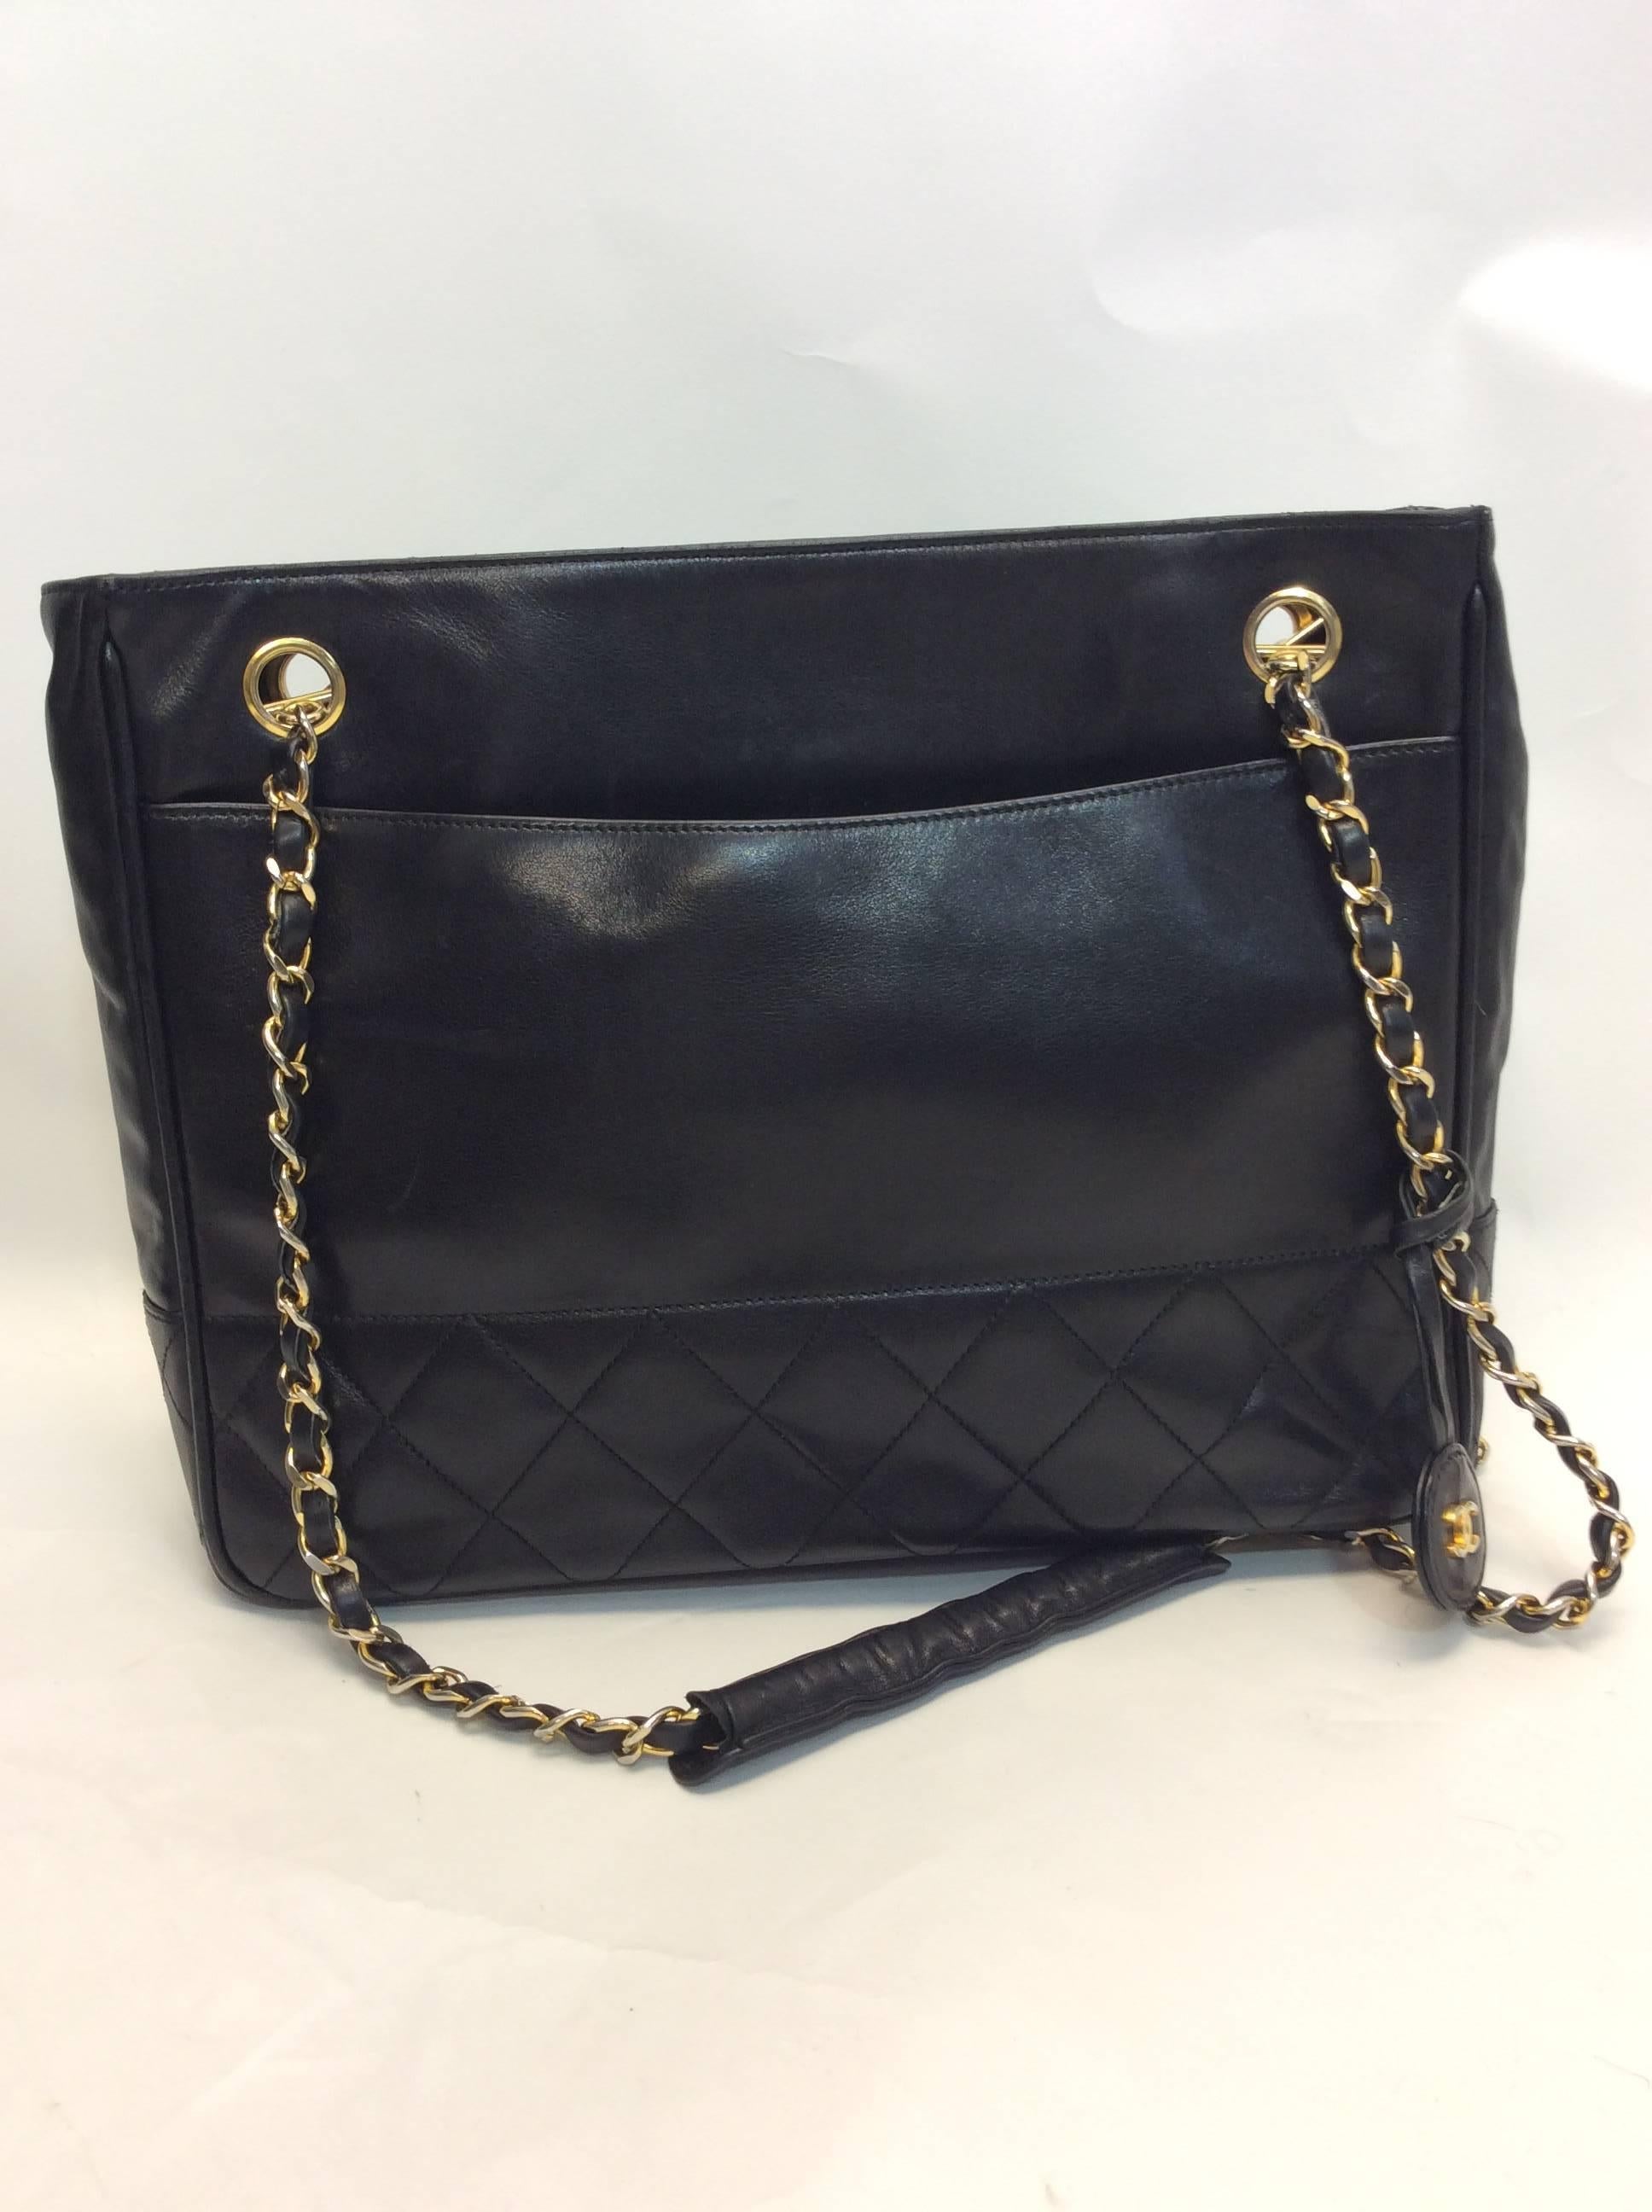 Vintage Chanel Black Quilted Chain Shoulder Handbag In Excellent Condition For Sale In Narberth, PA